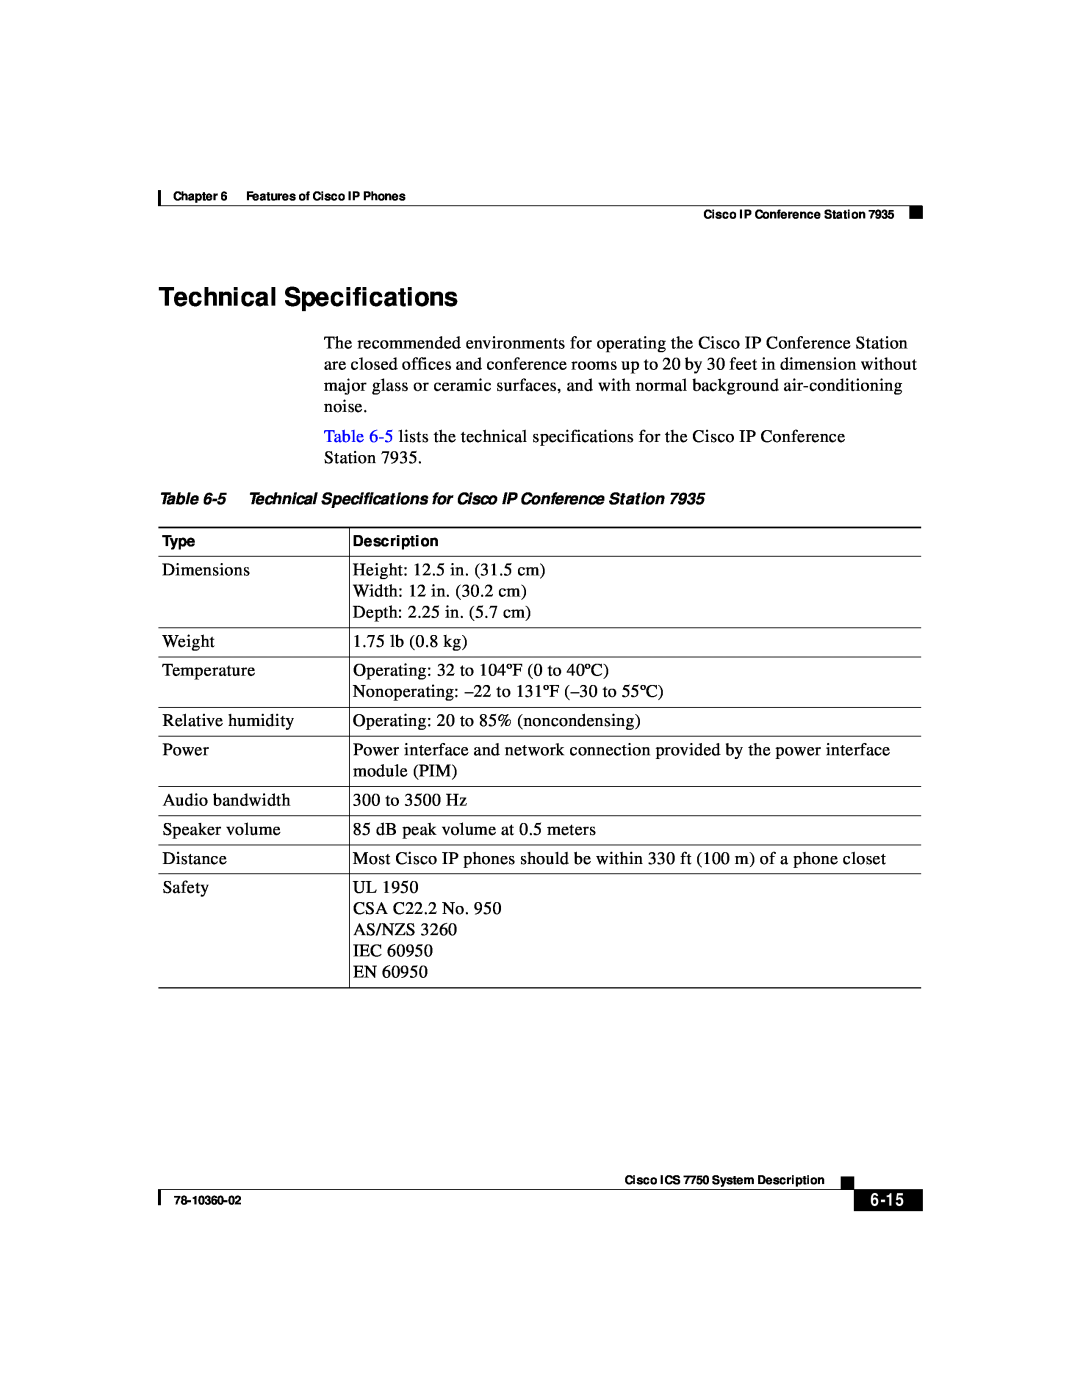 Cisco Systems ICS-7750 manual 6-15, 5 Technical Specifications for Cisco IP Conference Station 